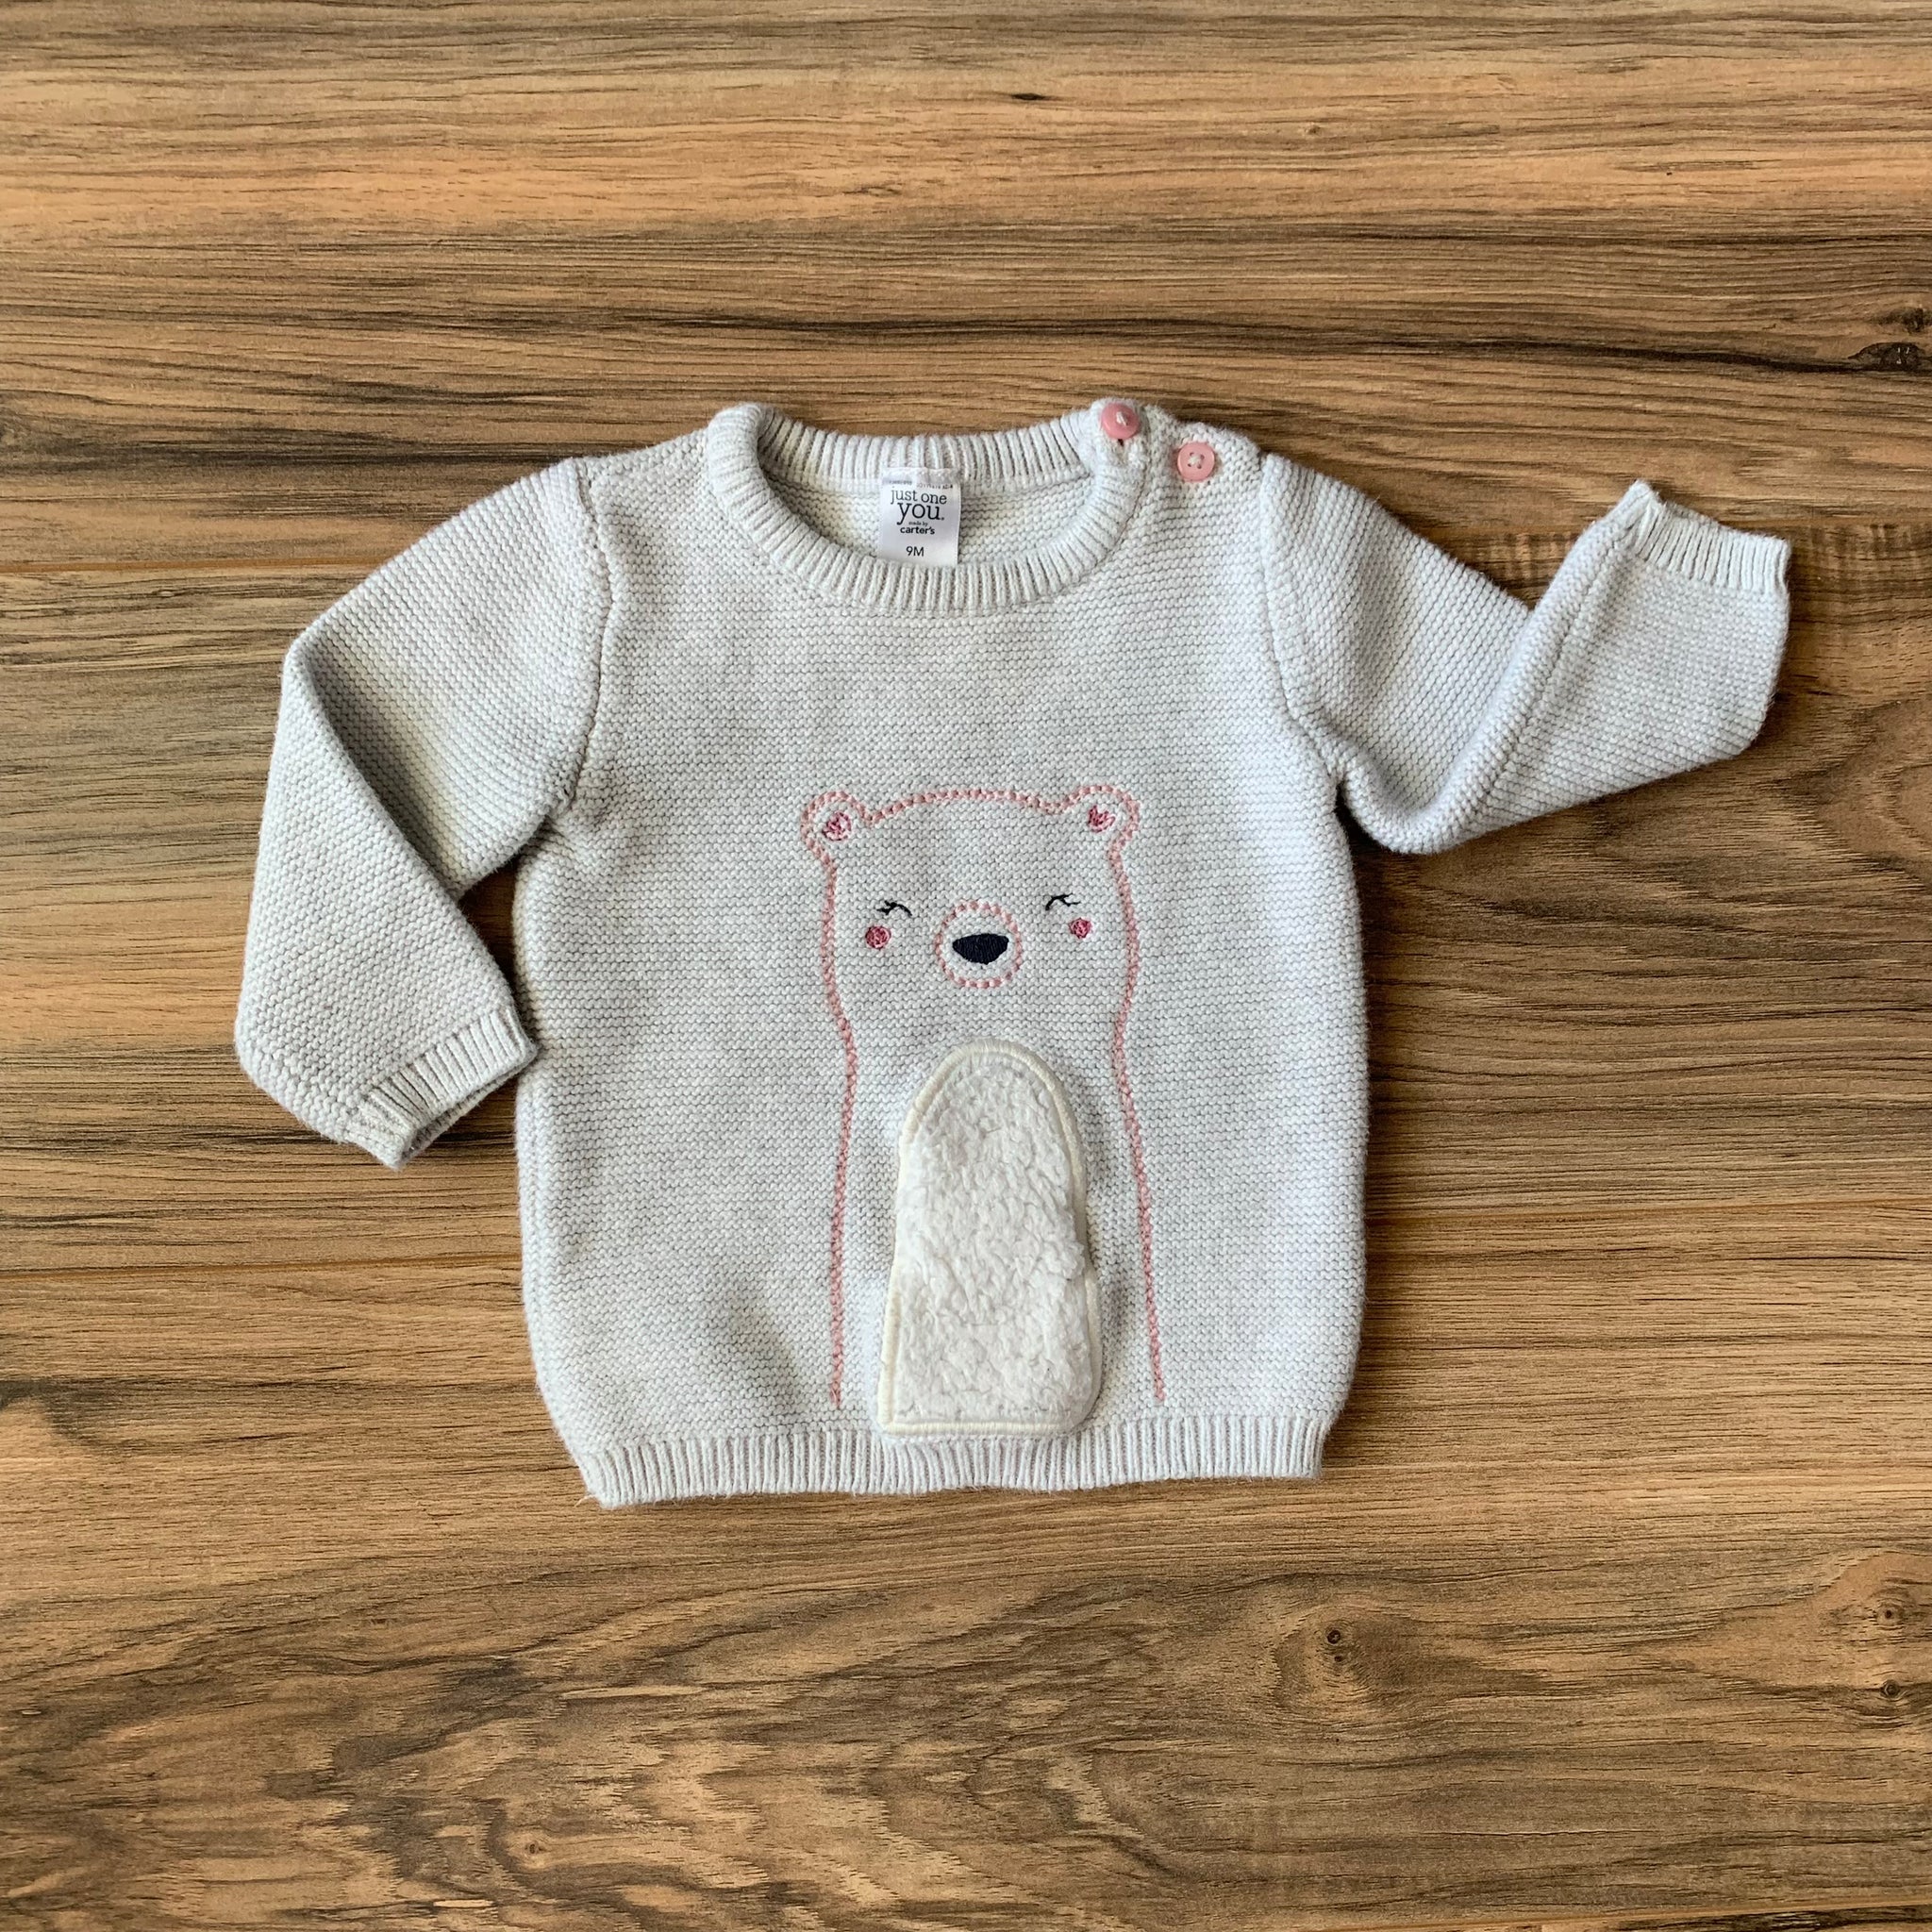 9m Carter's Gray Knit Bear Embroidery Sweater